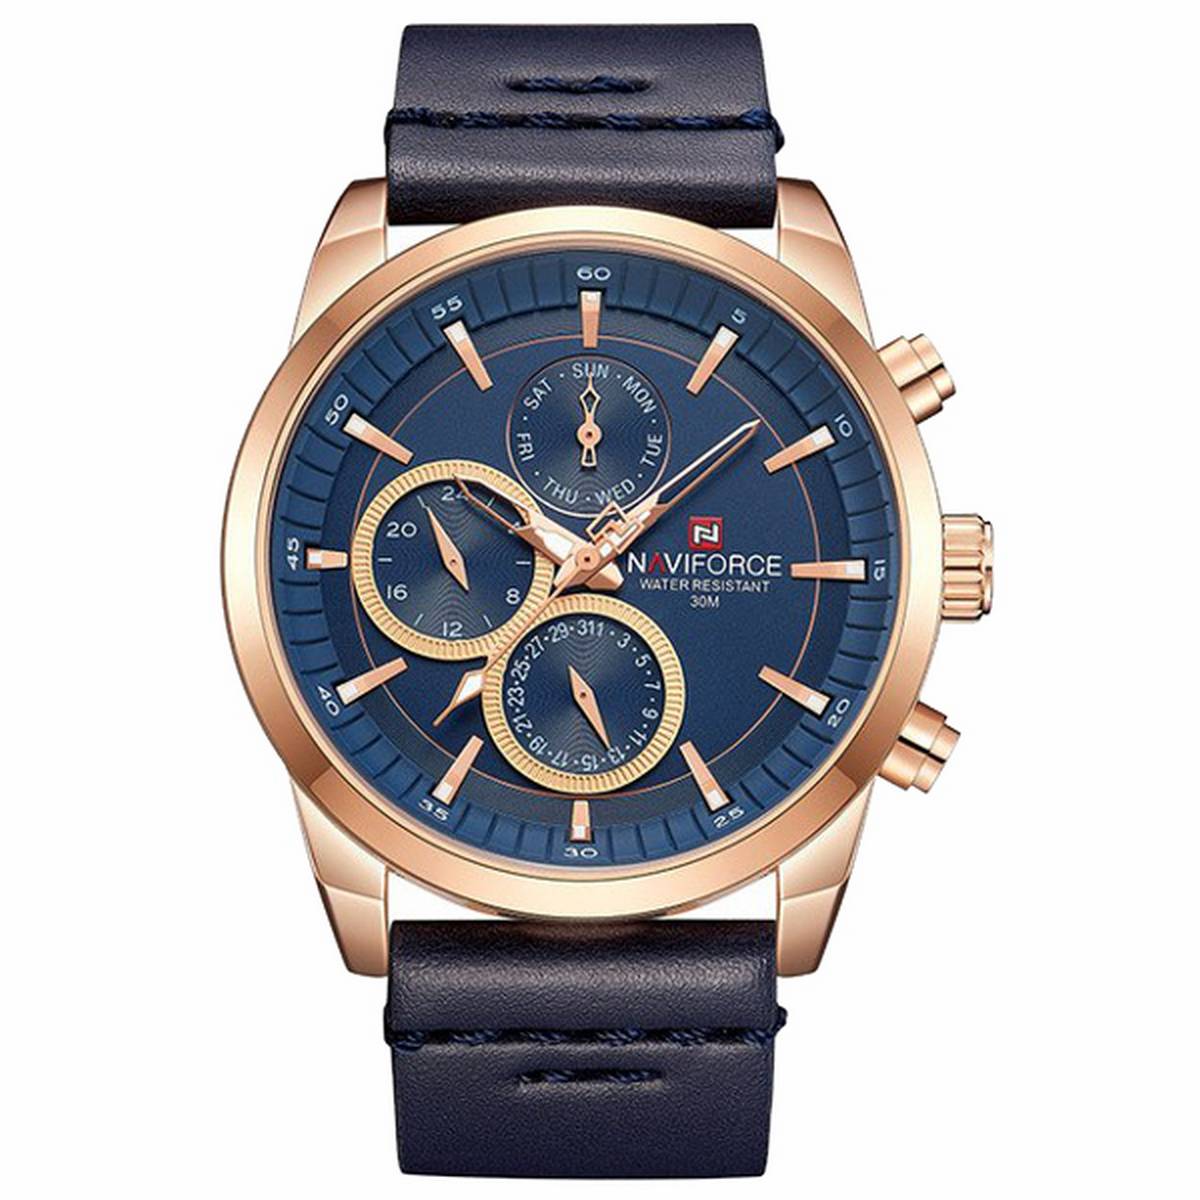 NAVIFORCE Navy Blue PU Leather Chronograph Watch For Men - RoseGold & Navy Blue